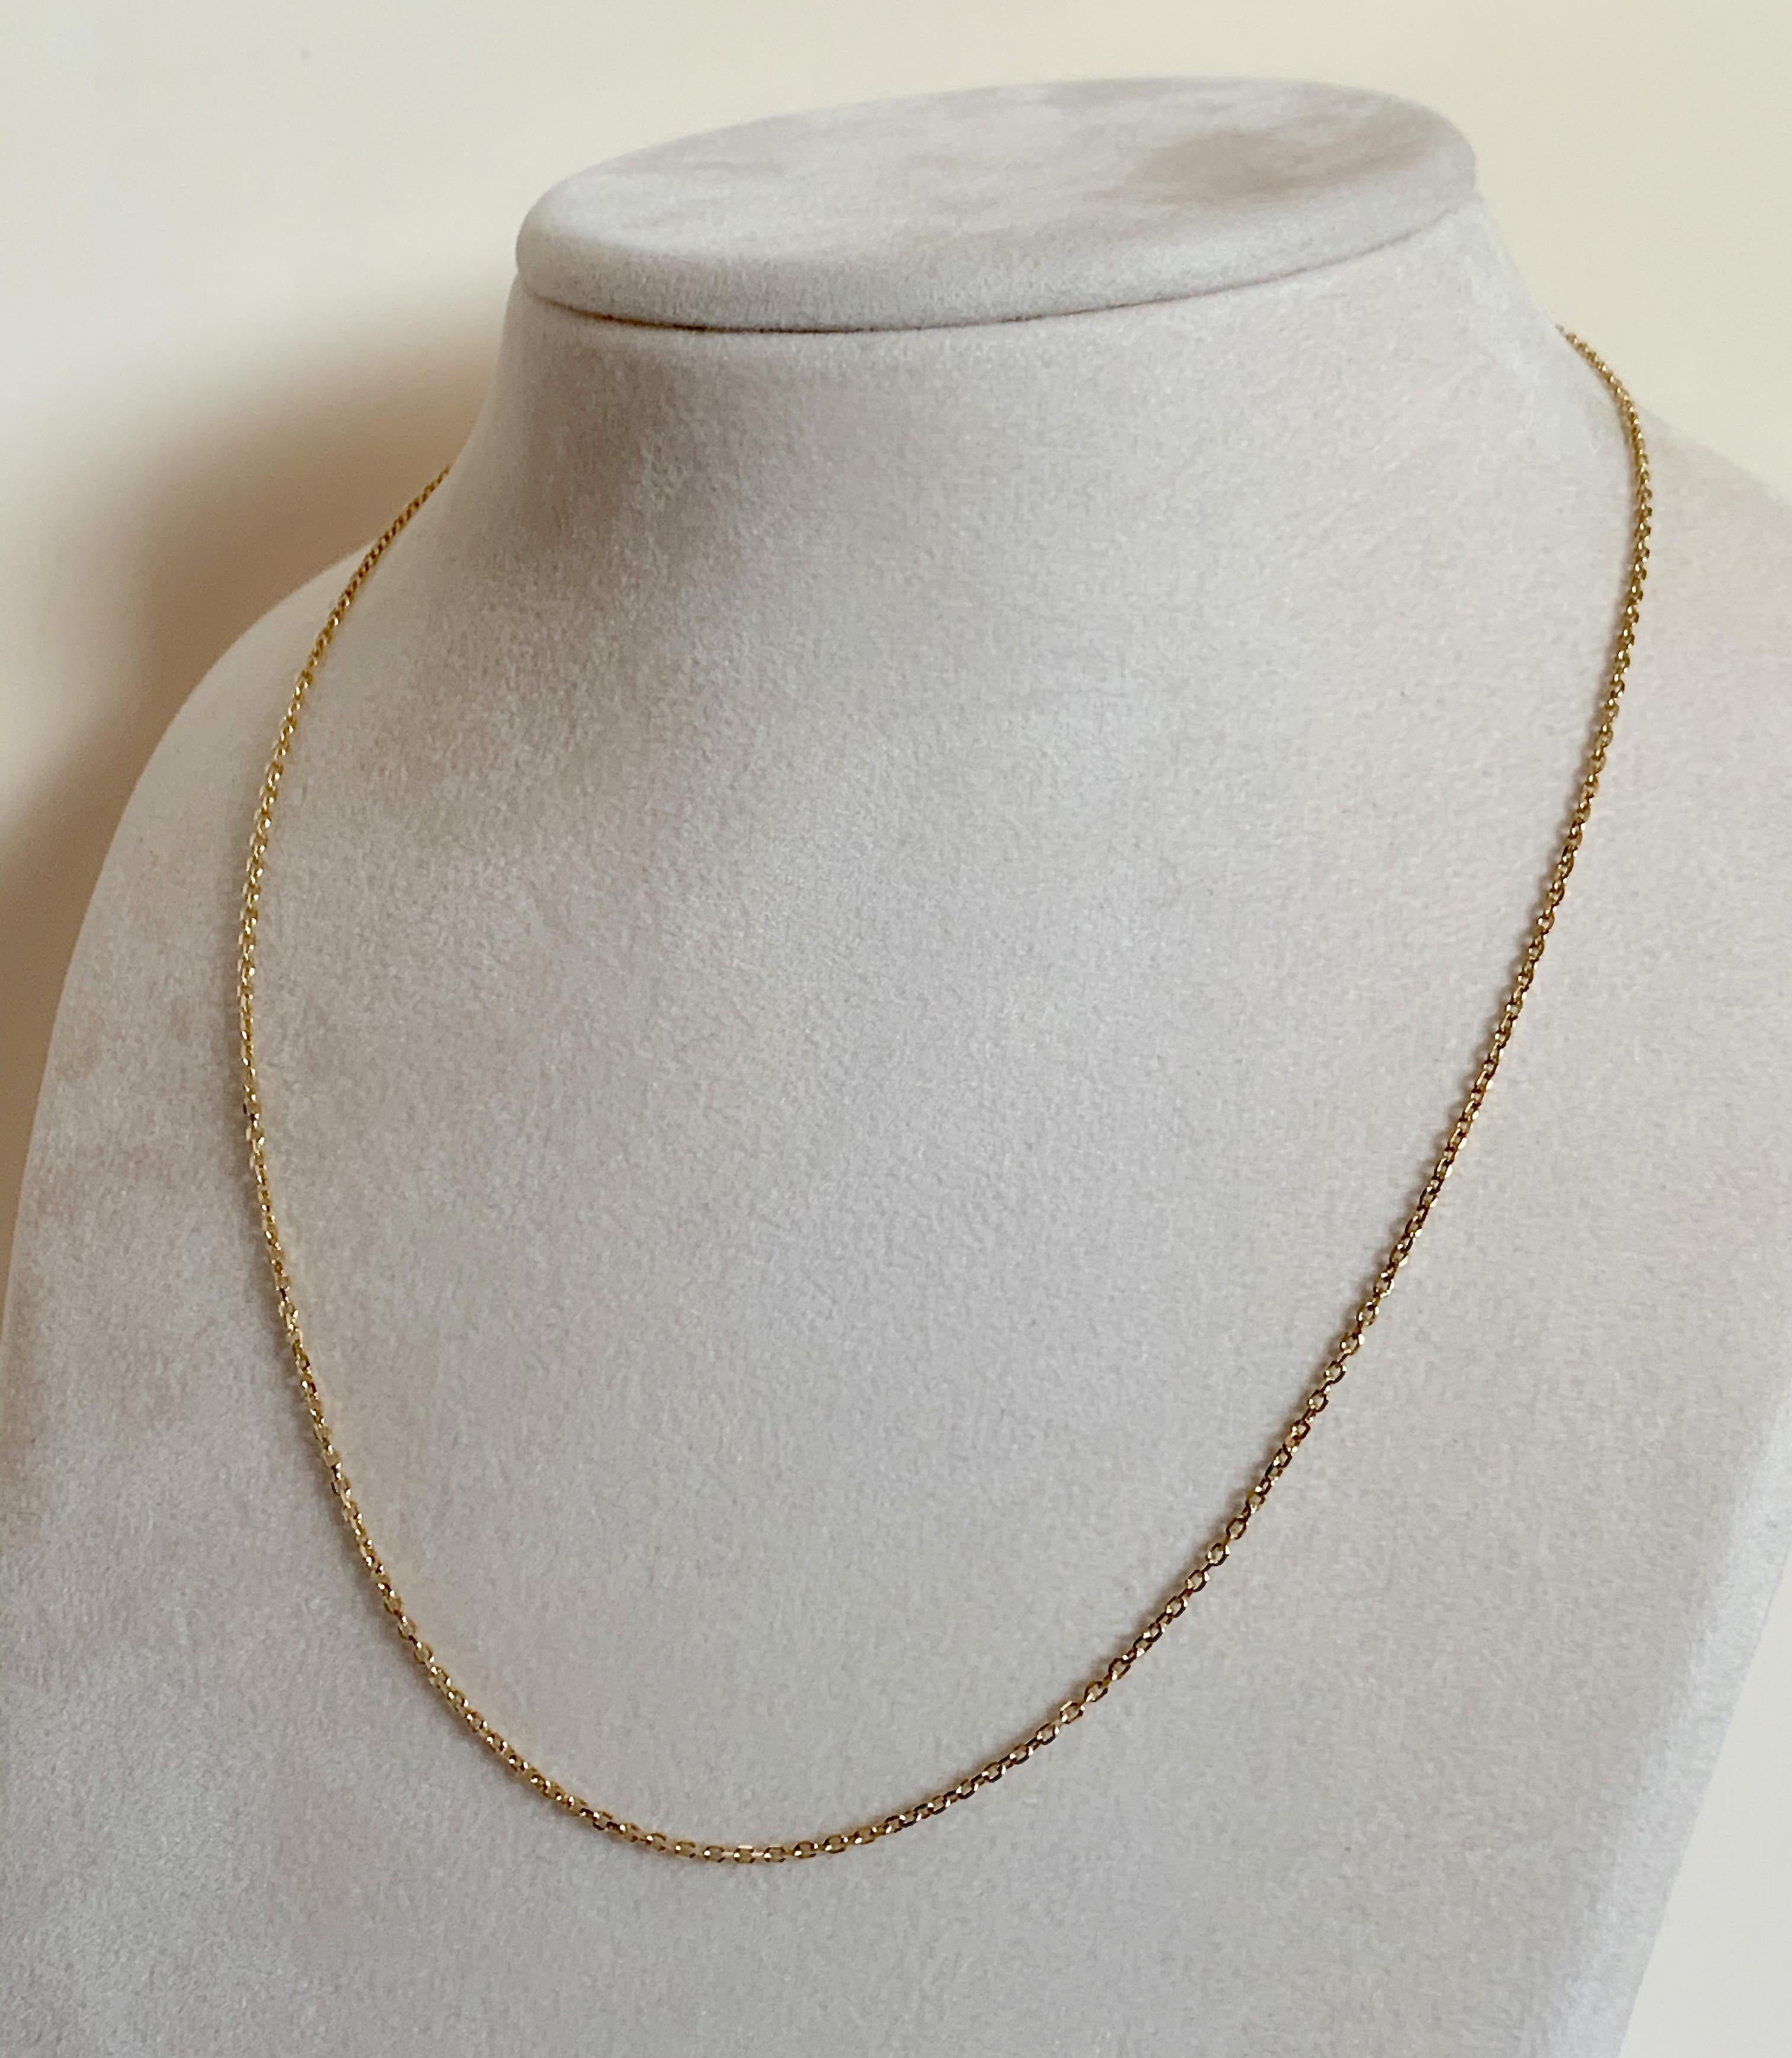 18 Karat Solid Yellow Gold Link Chain Necklace 45cm In New Condition For Sale In London, GB